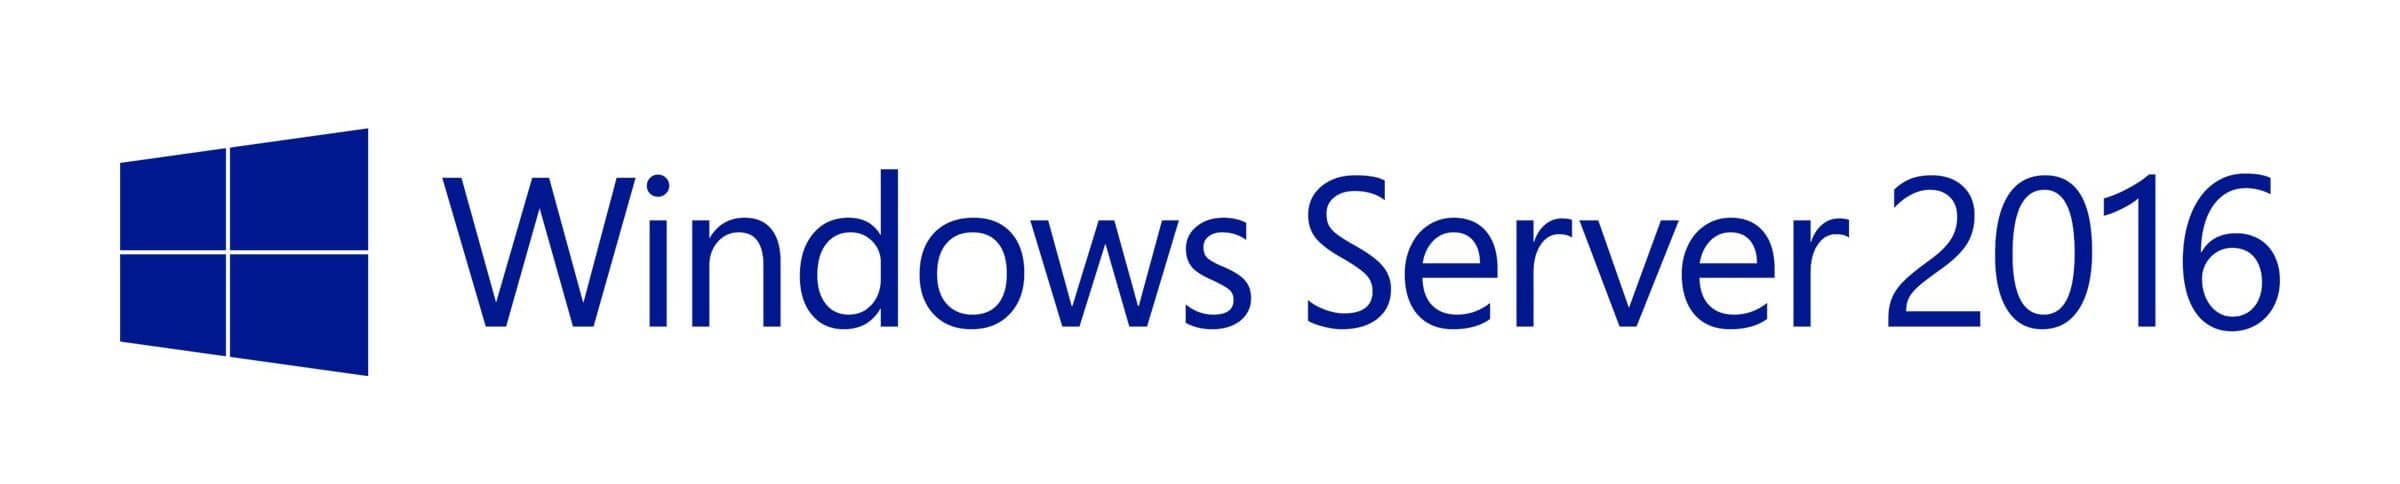 Windows server 2016 end of support